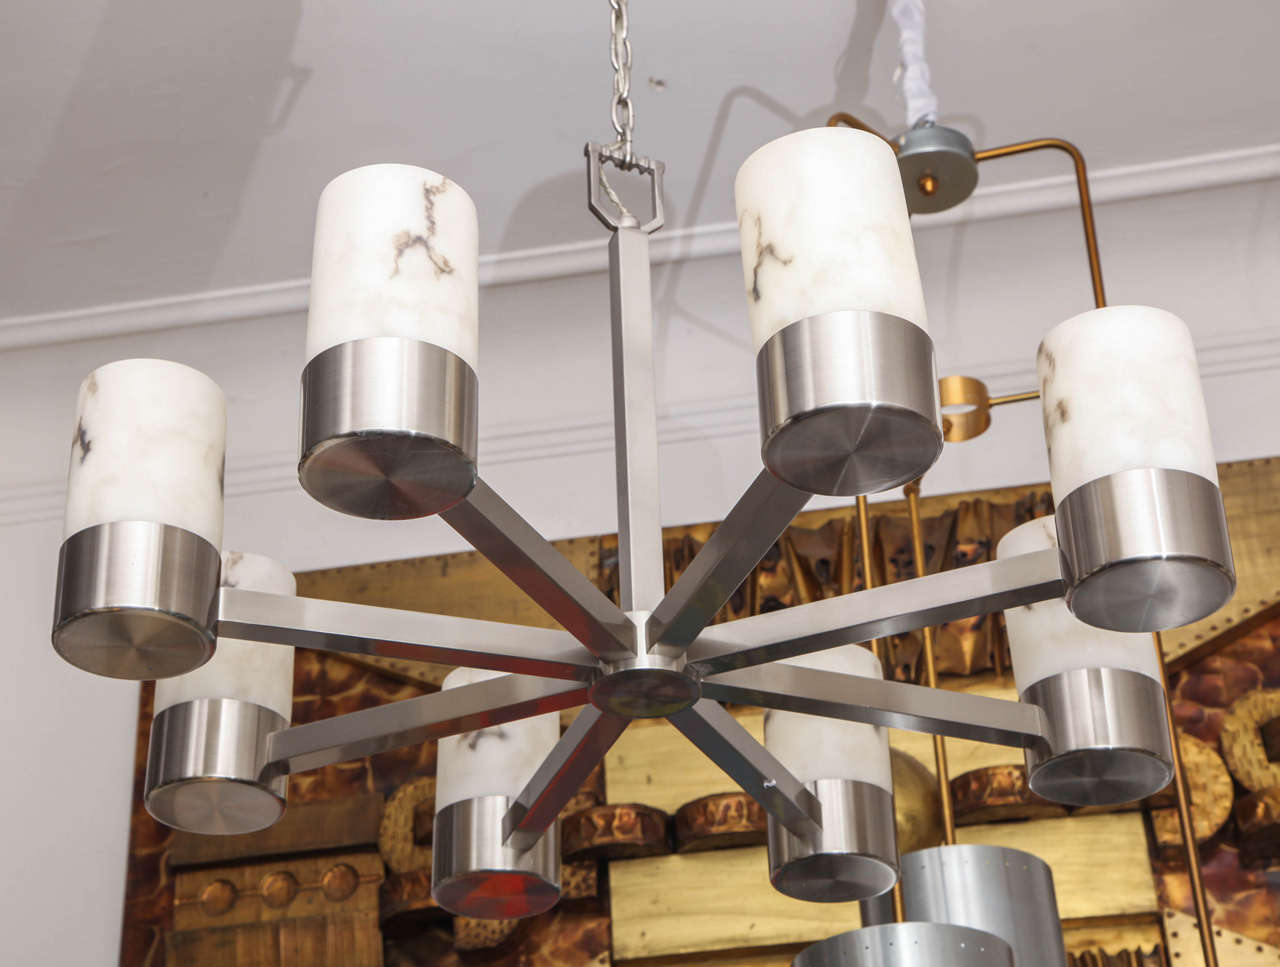 A 1970s architectural modernist ceiling fixture of polished nickel and alabaster.